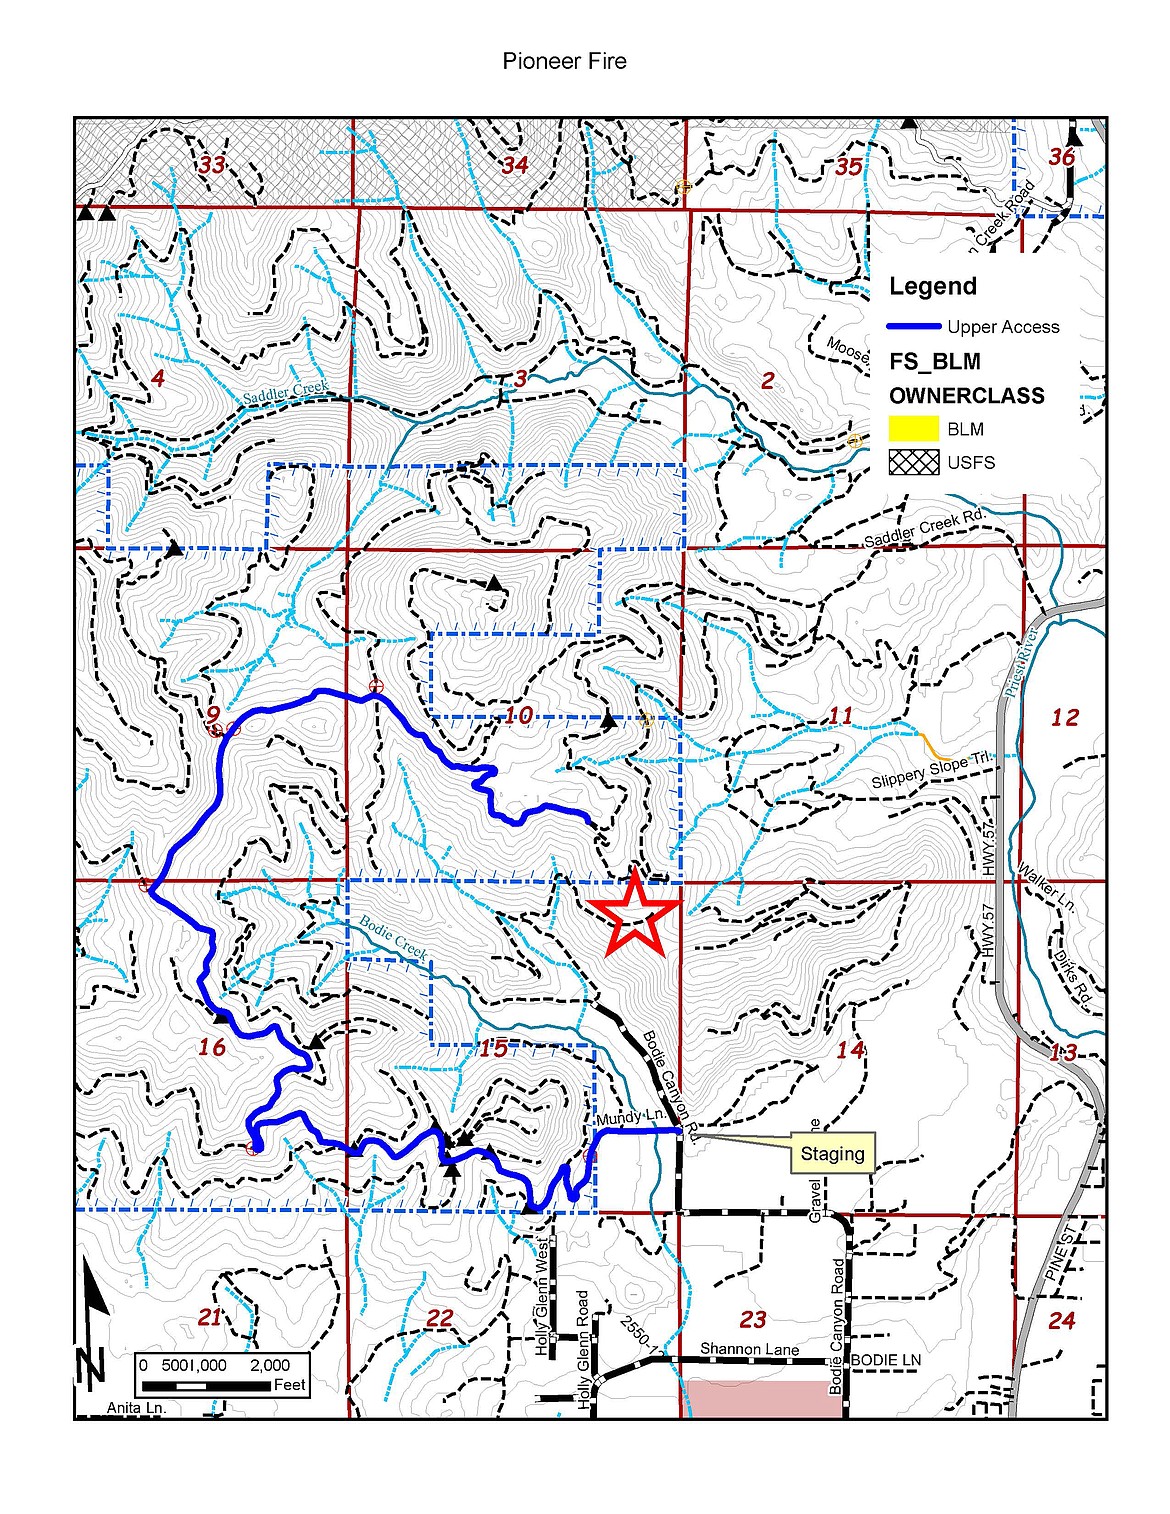 A map of the area near the Pioneer Fire. The fire is located to the north and northwest of the star on the map in sections 10 and 11.